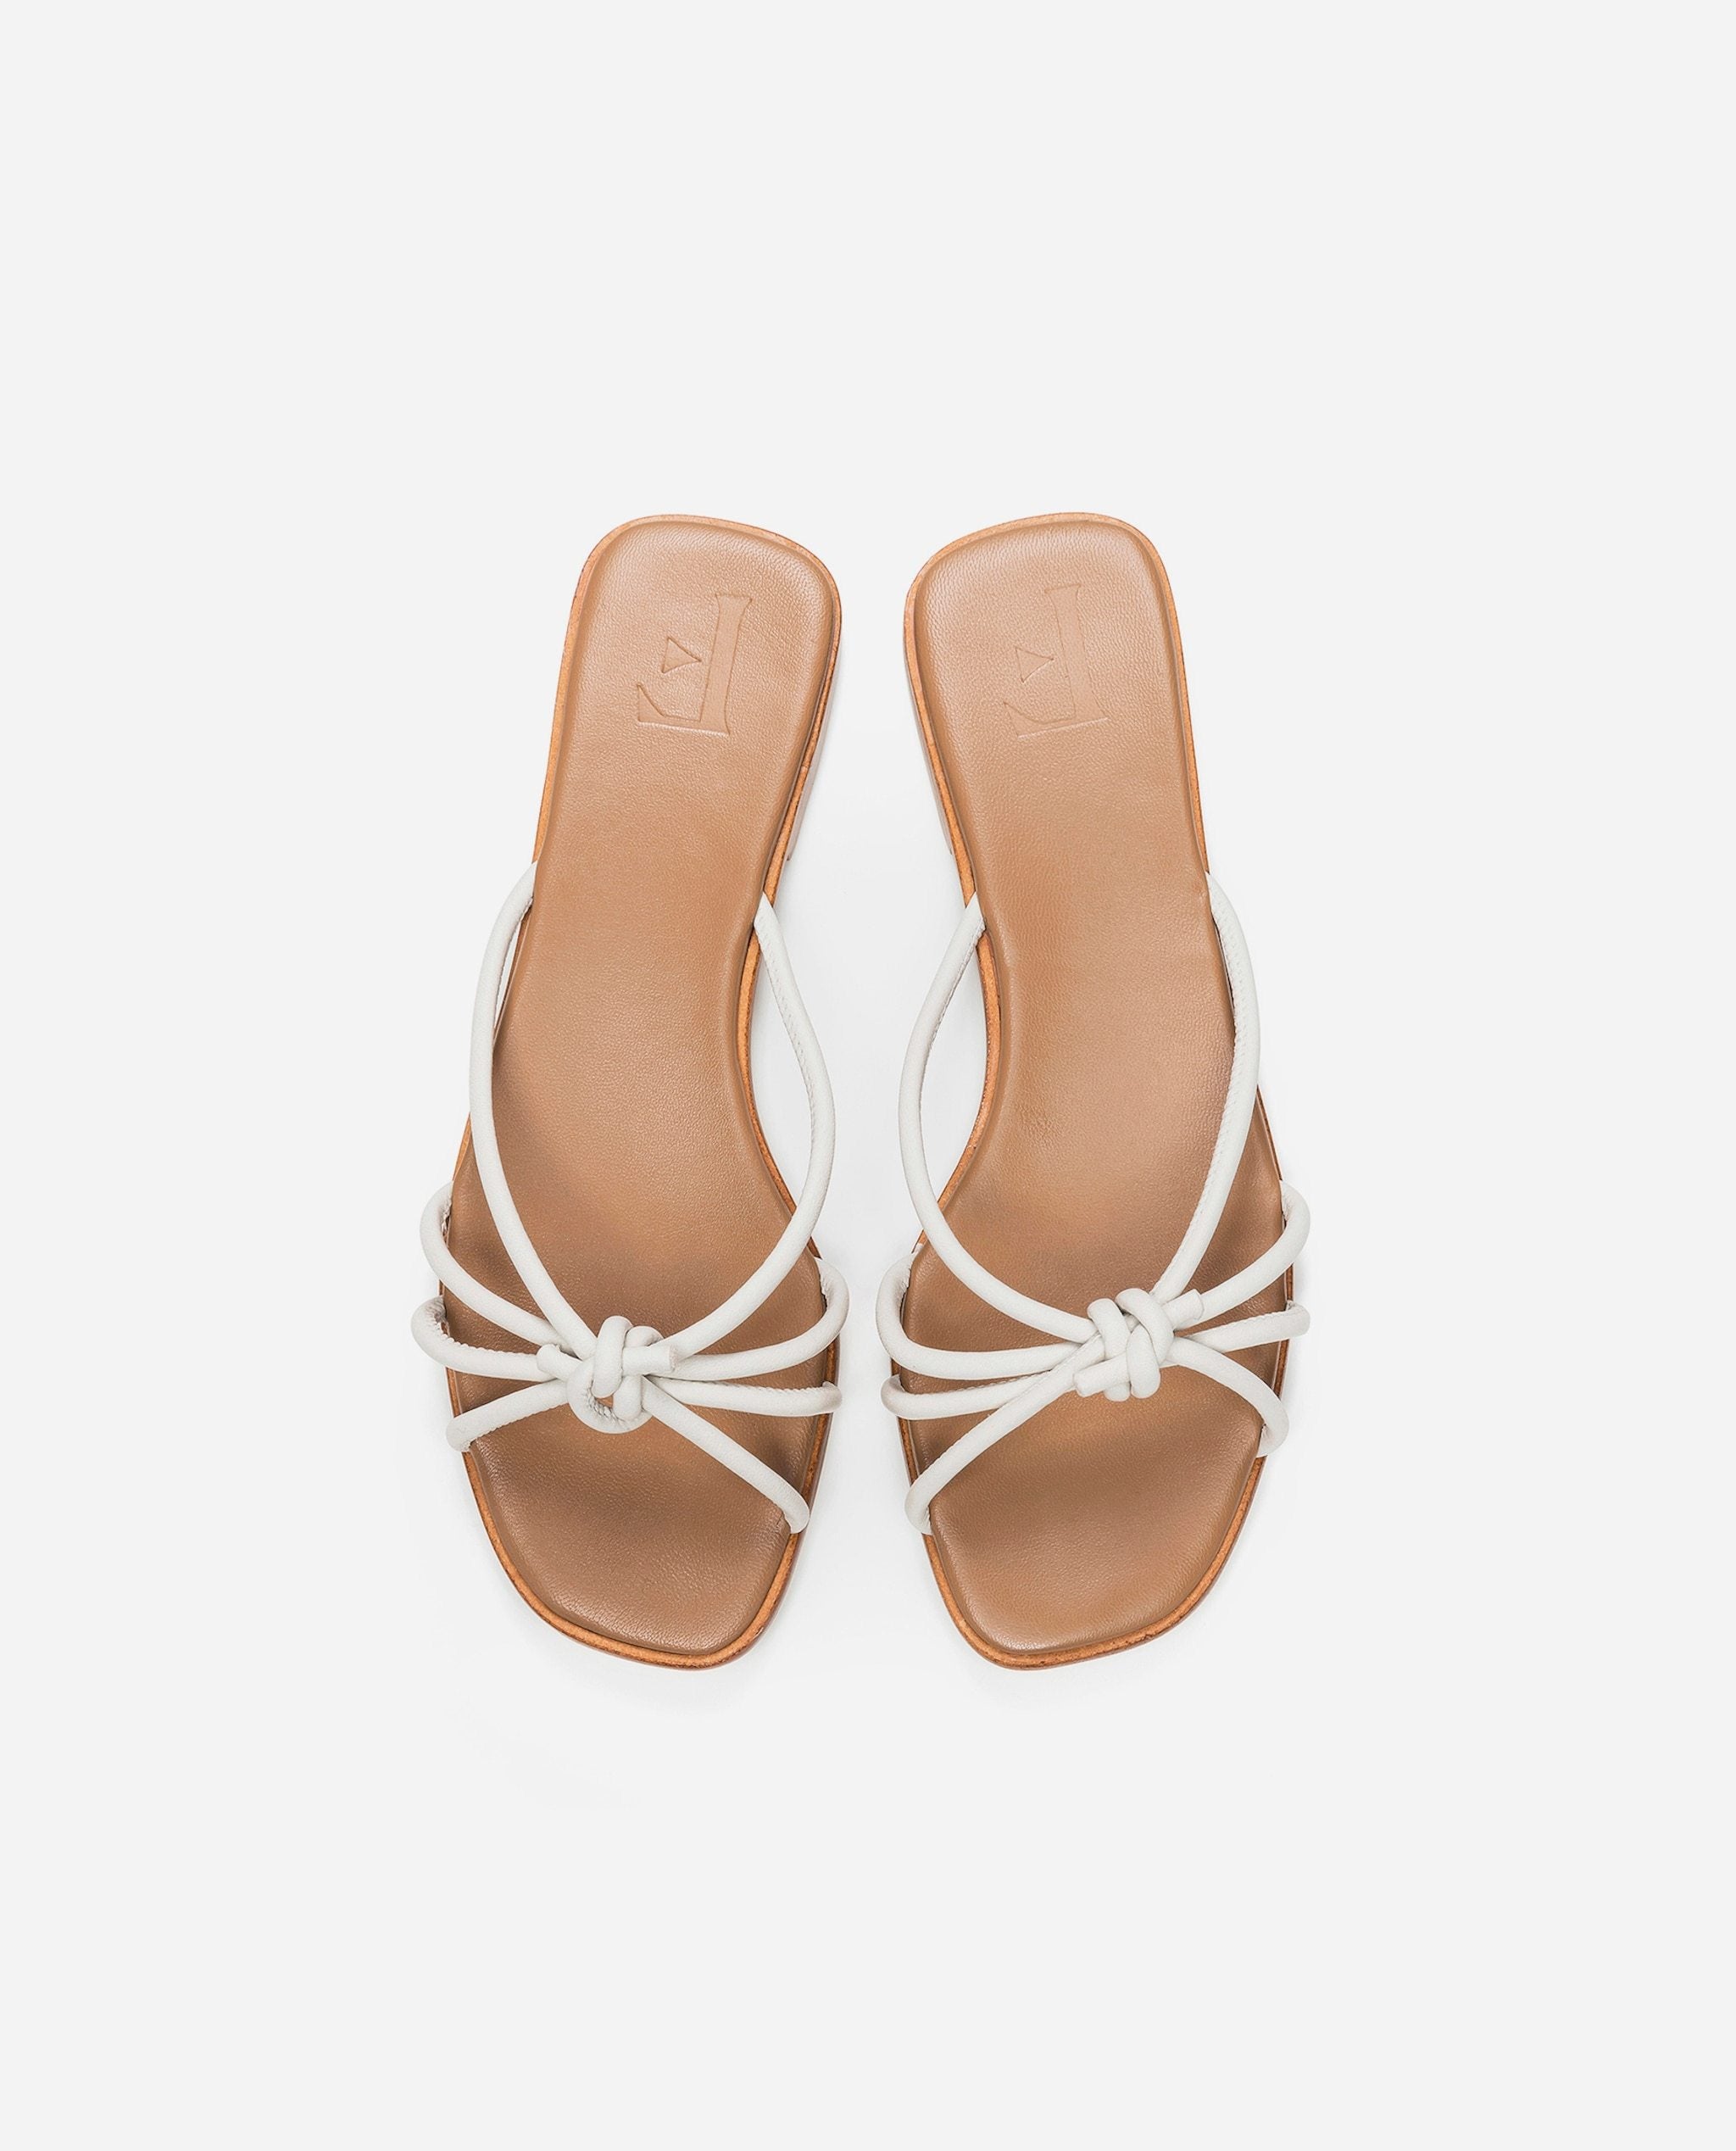 Yvette Leather Off White Flat Sandals Flats 19010700801-008 - 4